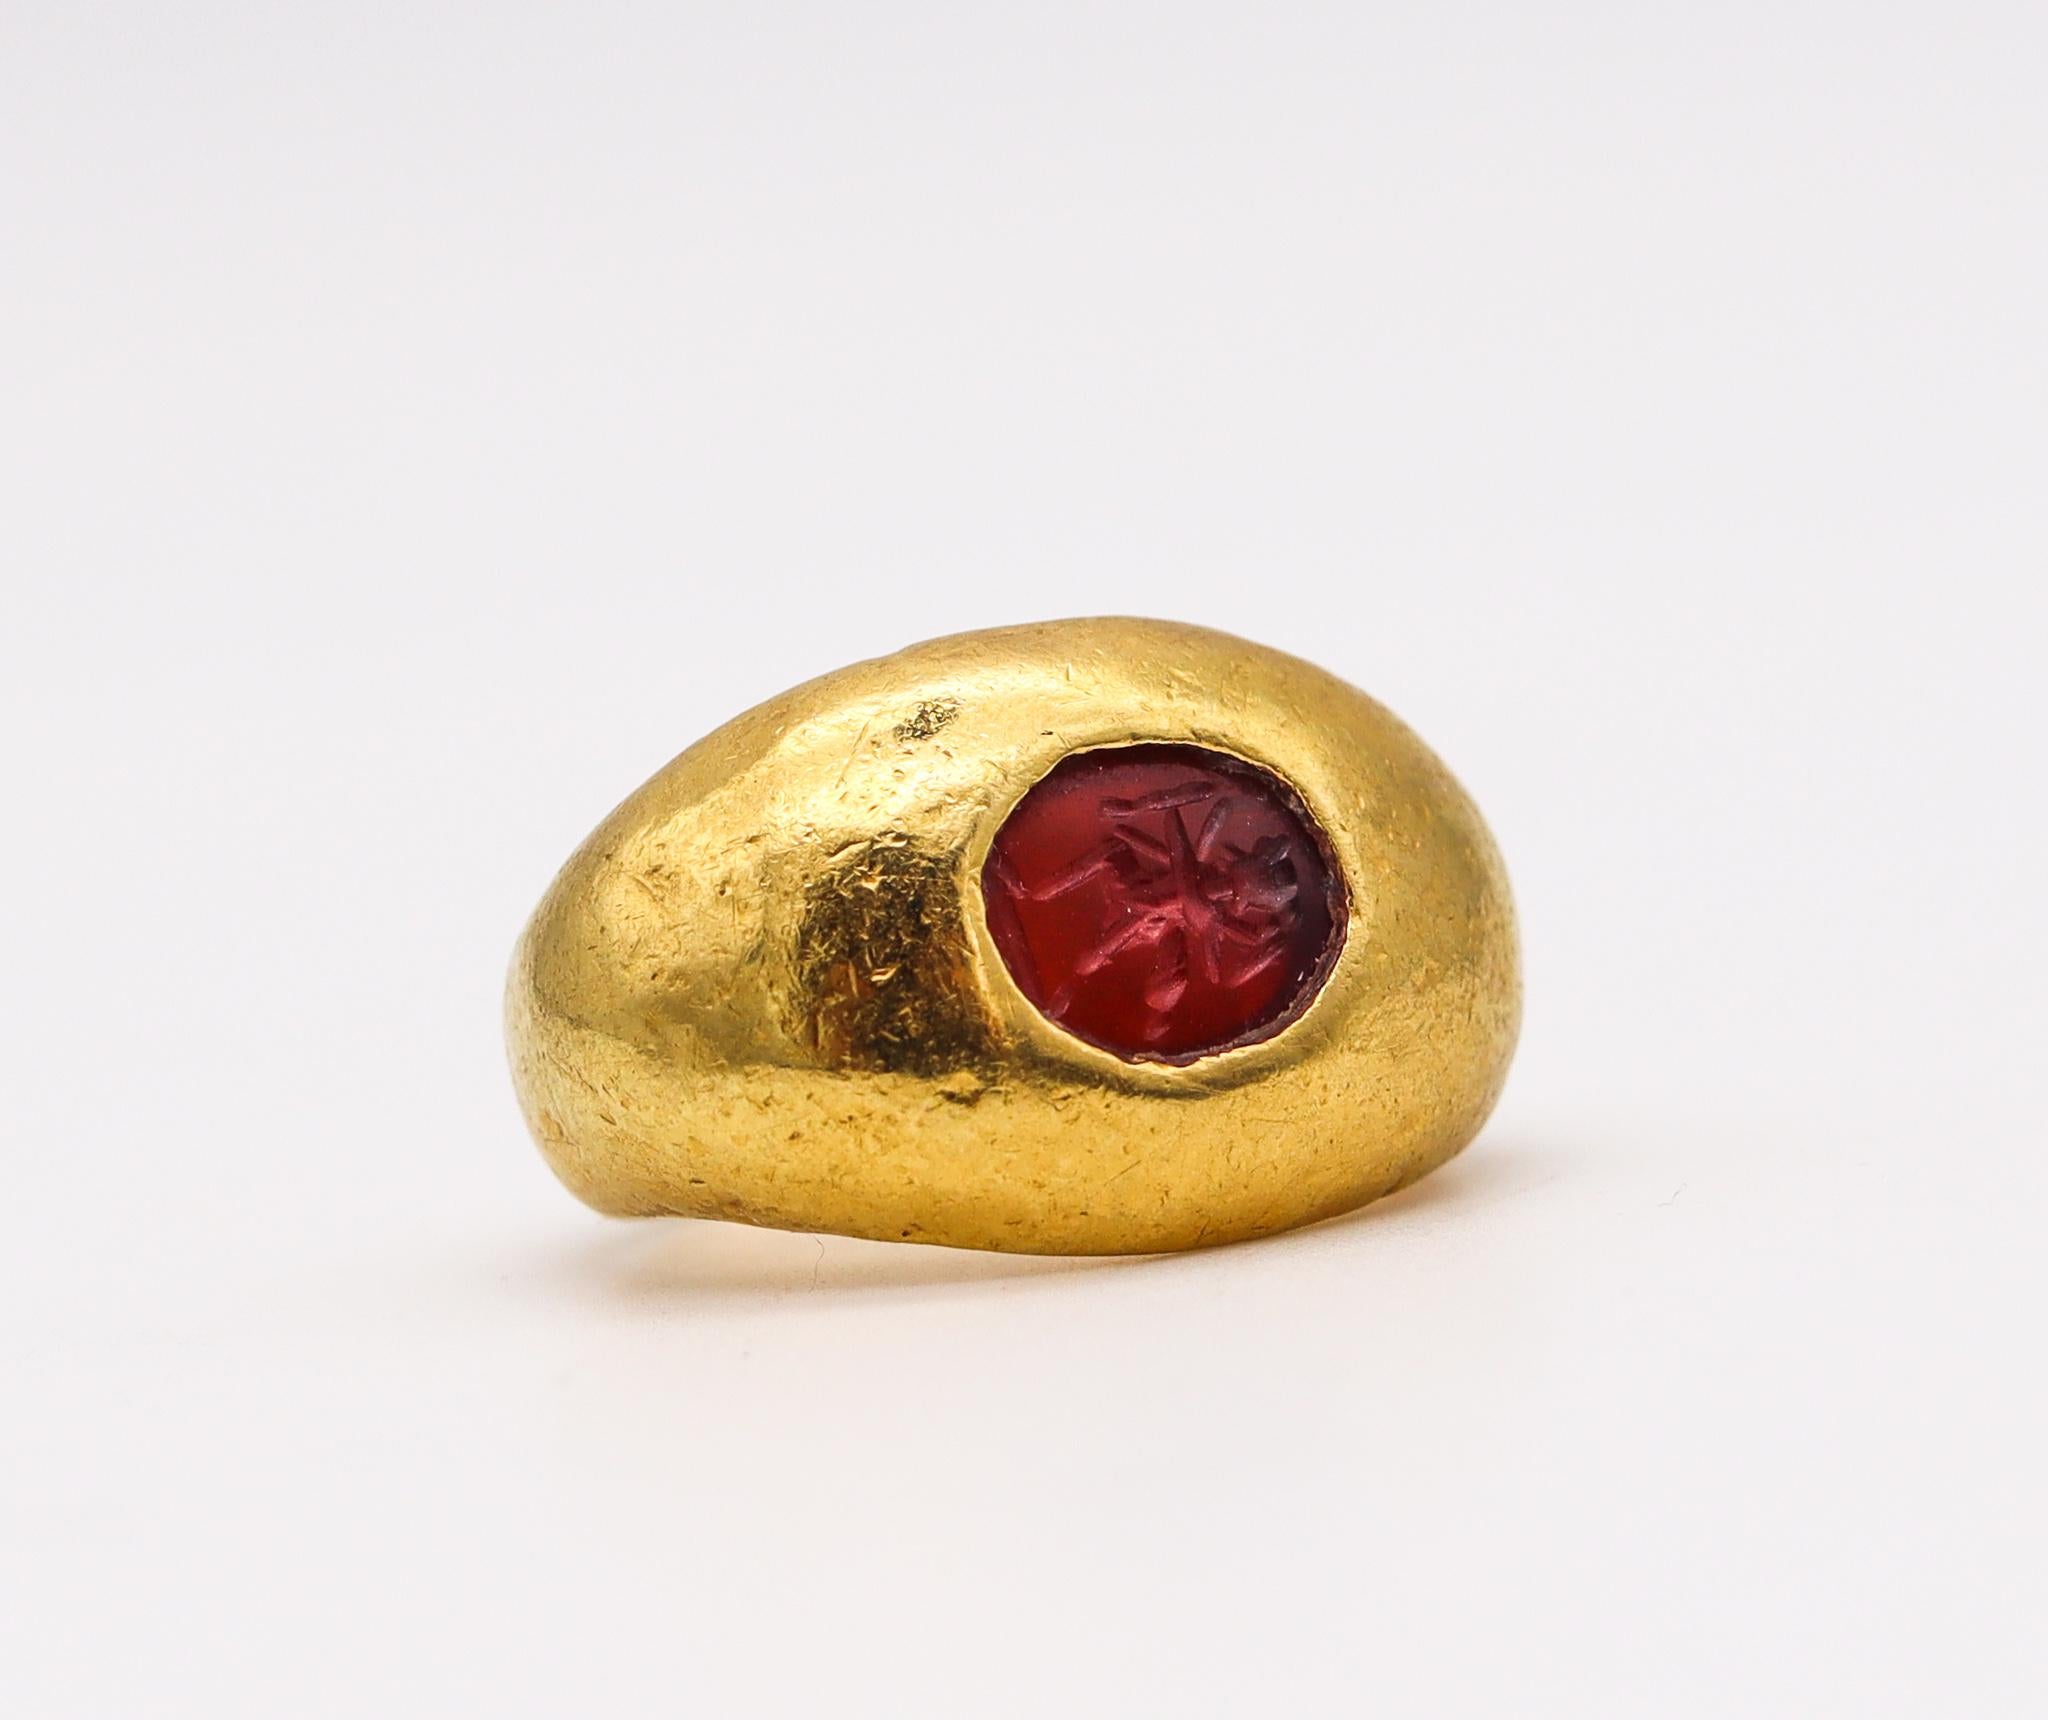 Cabochon Ancient Rome 100 AD Signet Intaglio Ring 22Kt Yellow Gold with Carved Carnelian